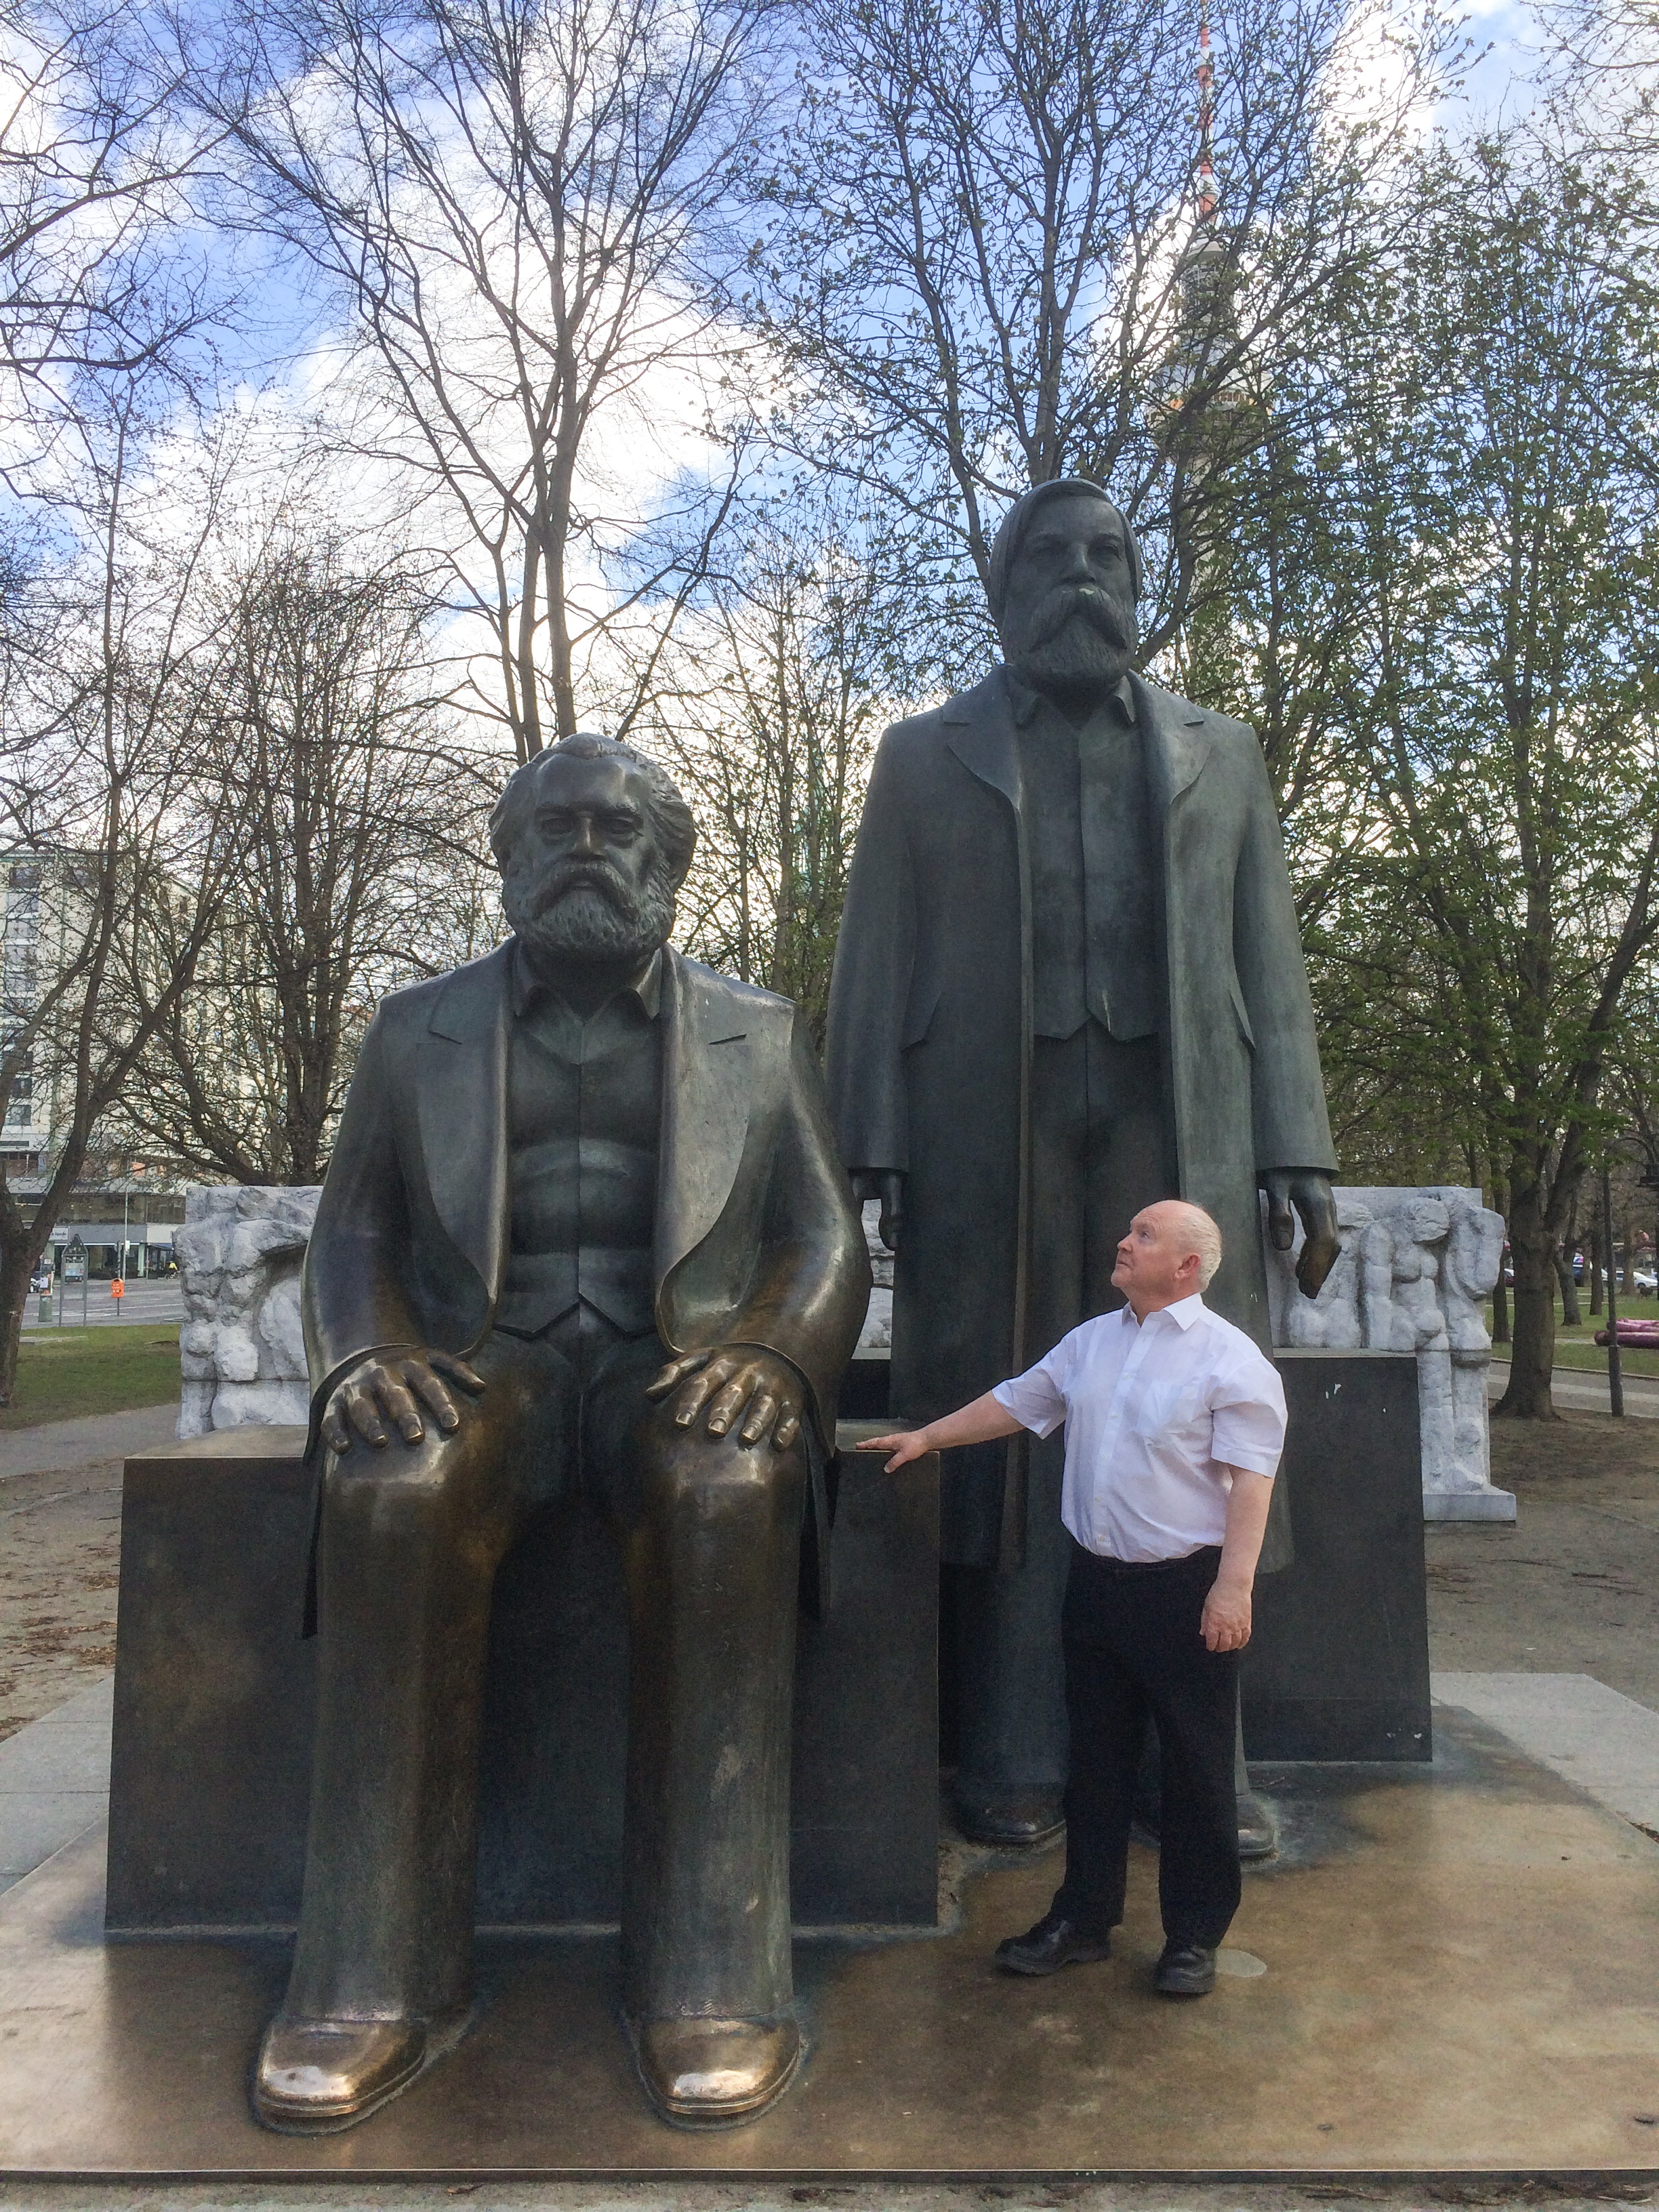 While in Berlin for the Specs On festival I visited the statues of Marx and Engels in 2017